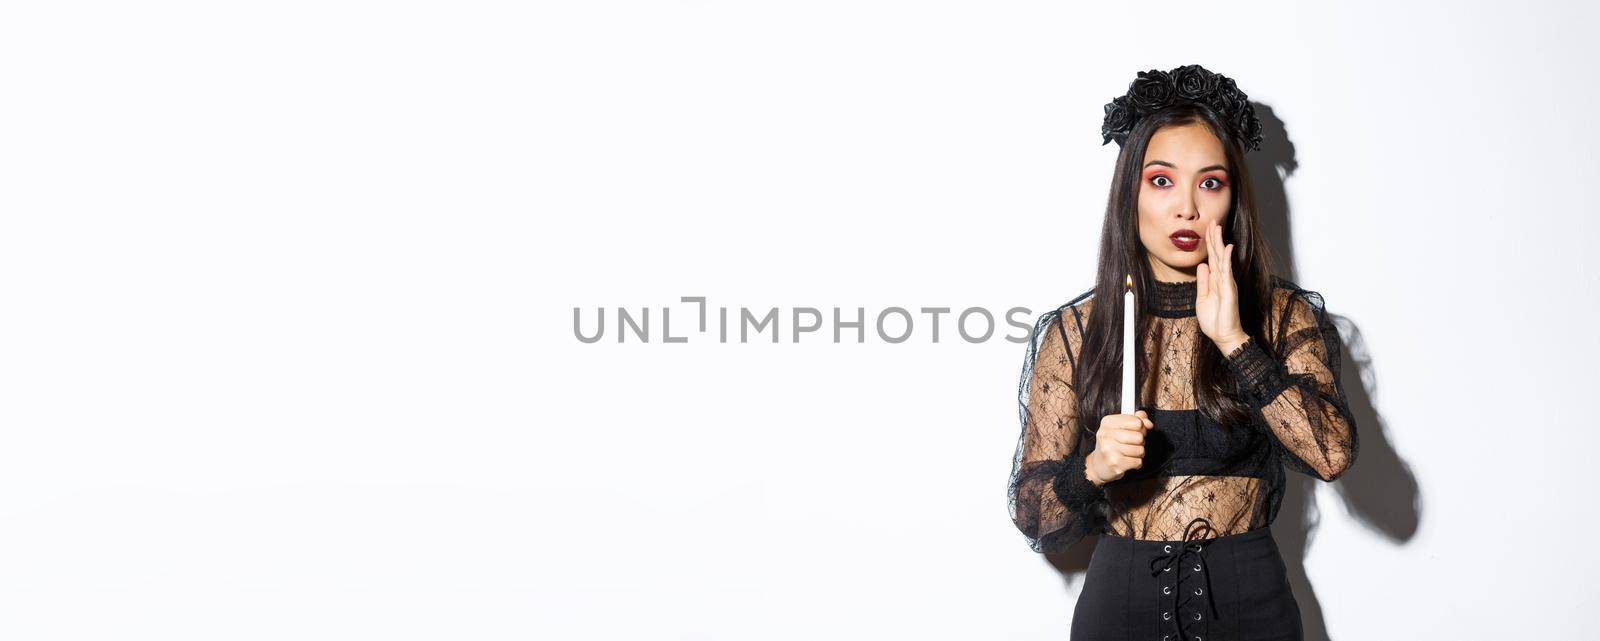 Tensed and worried asian woman in witch costume holding lit candle and whispering, standing over white background.